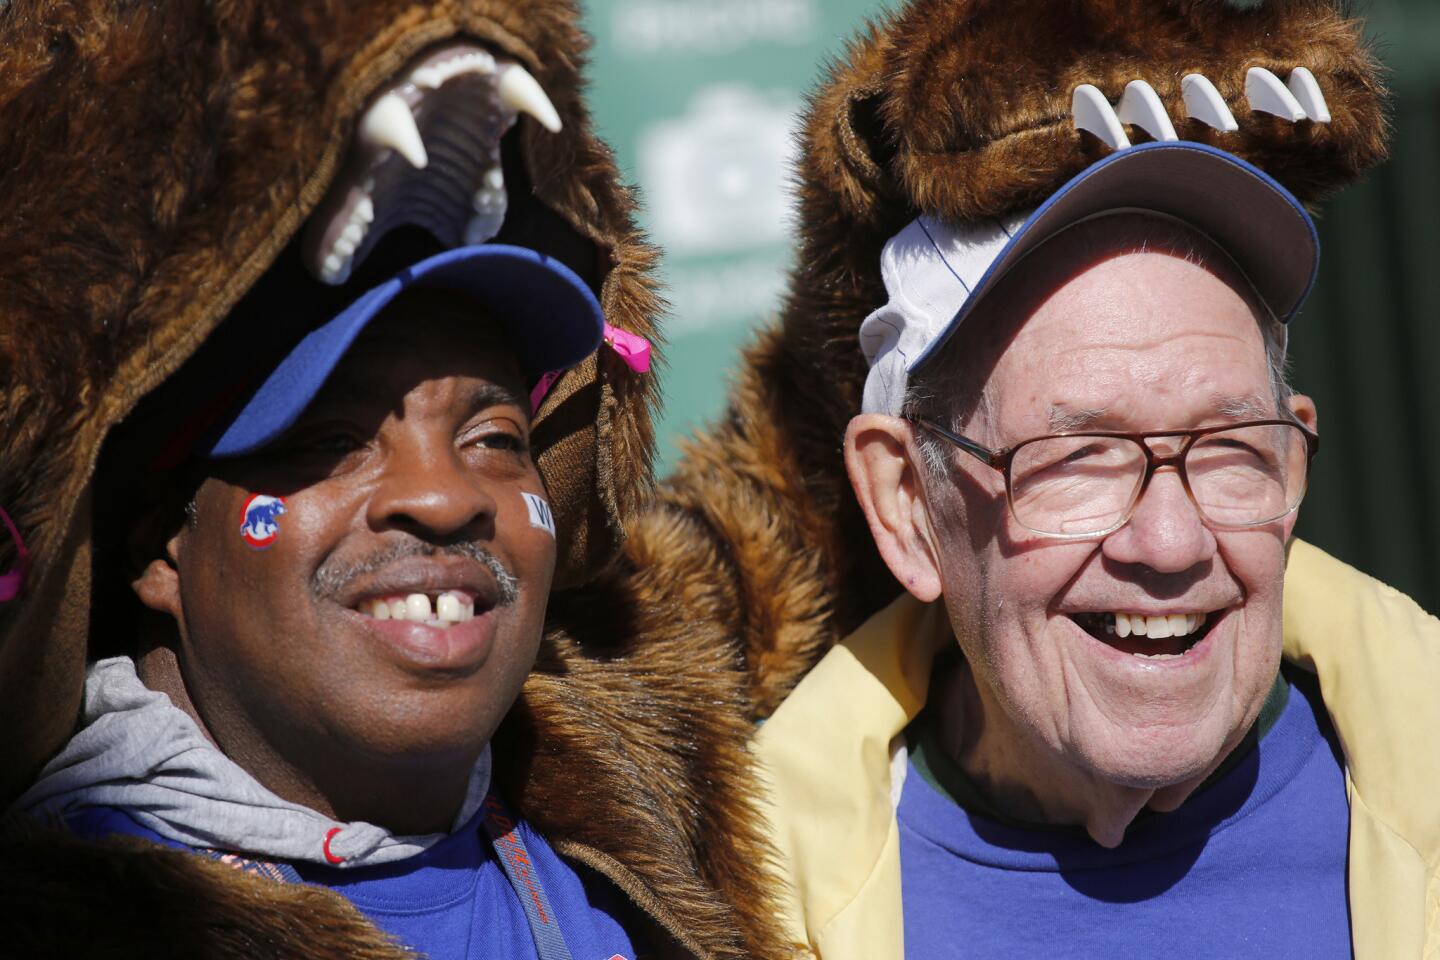 Streetwise vendor Samuel Sanders, left, poses with Cubs fan Raymond Barnes, 85, under the marquee at Wrigley Field on Oct. 24, 2016, ahead of the World Series.